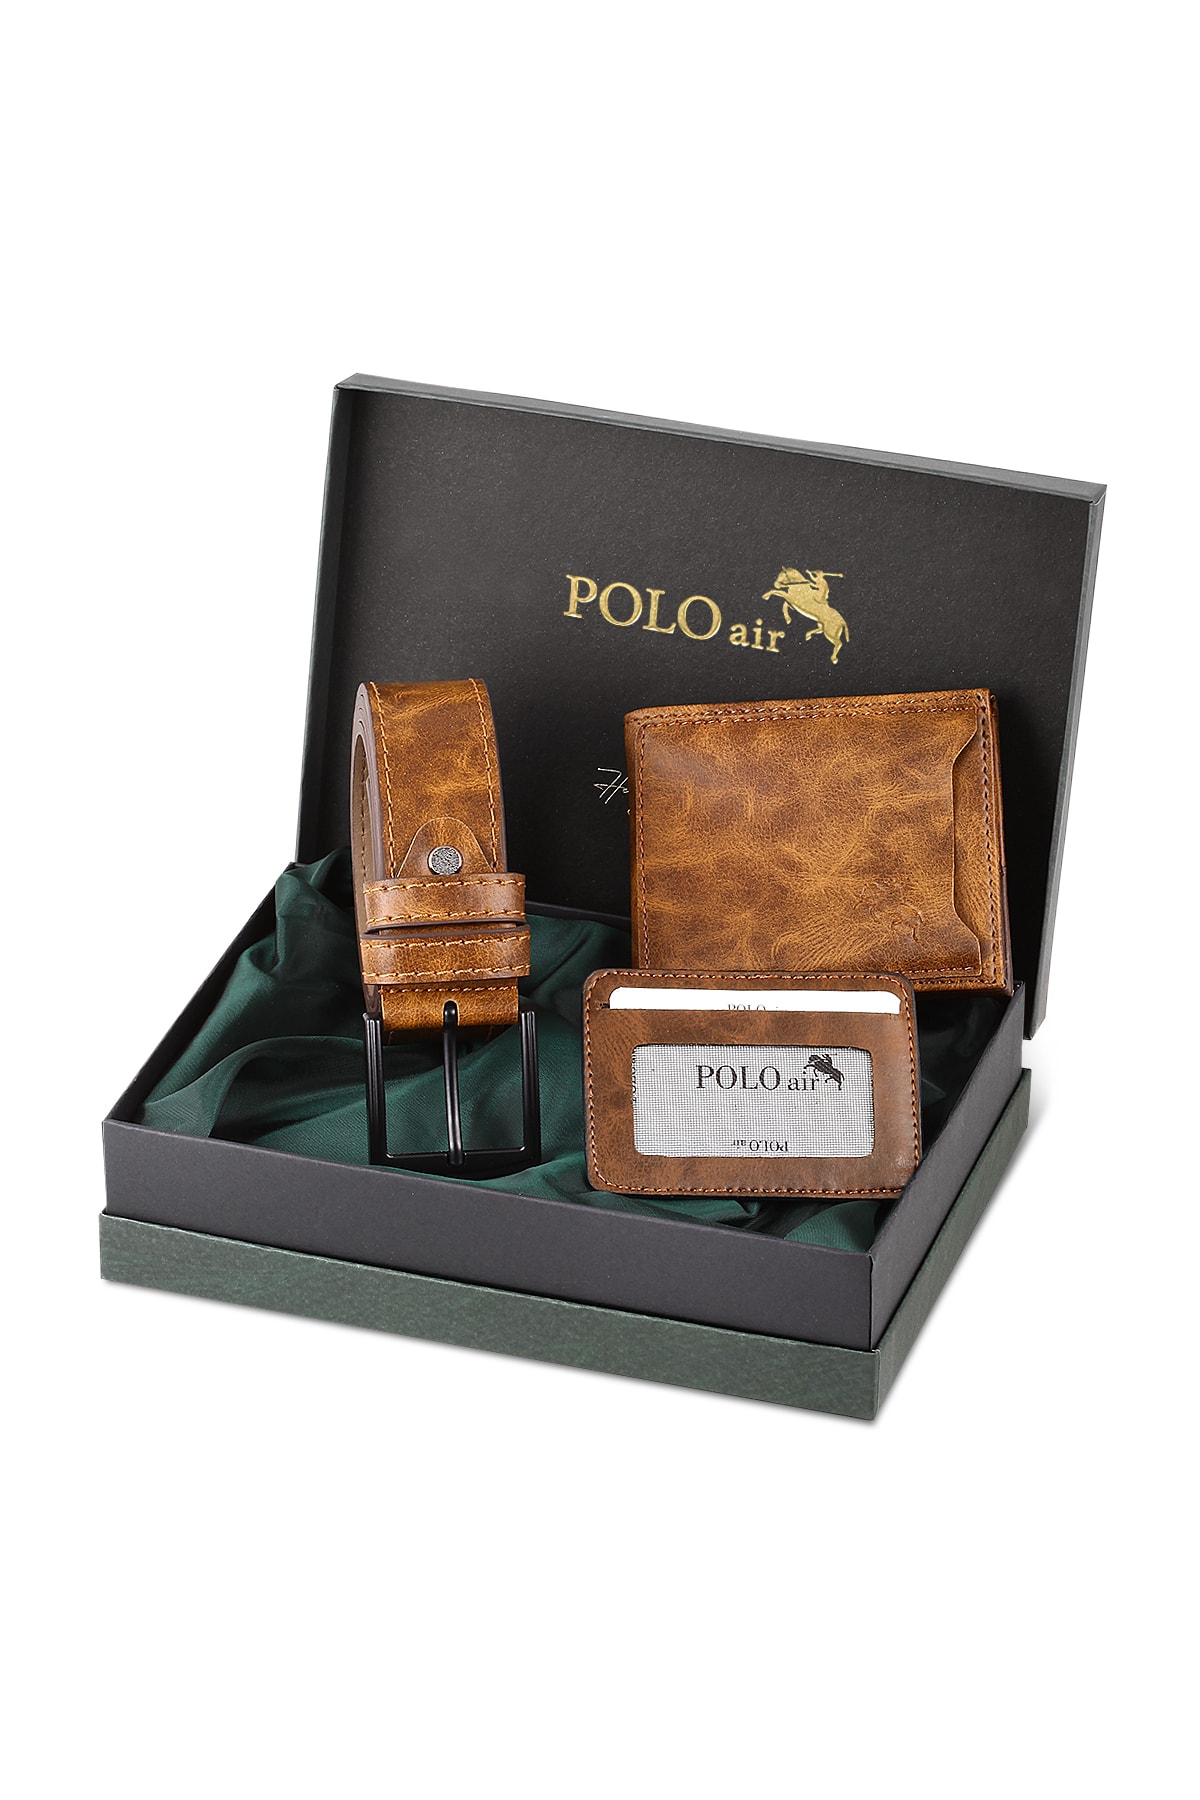 Polo Air Boxed Men's Sports Wallet Belt Card Holder Set Brown